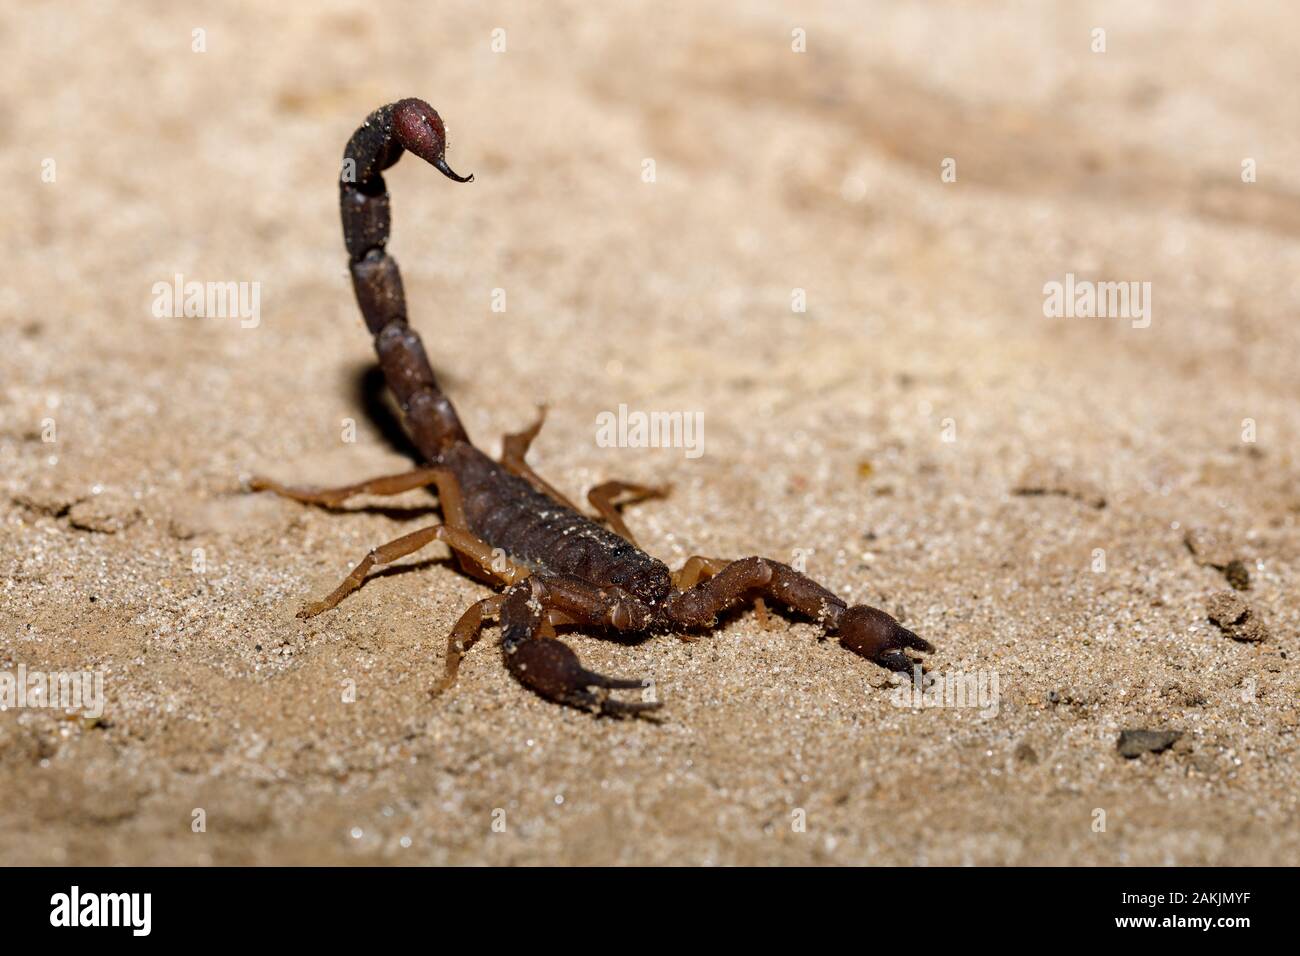 Scorpions prepared to attack with the thorn upright, Masoala National park, Africa, Madagascar wildlife and wilderness Stock Photo